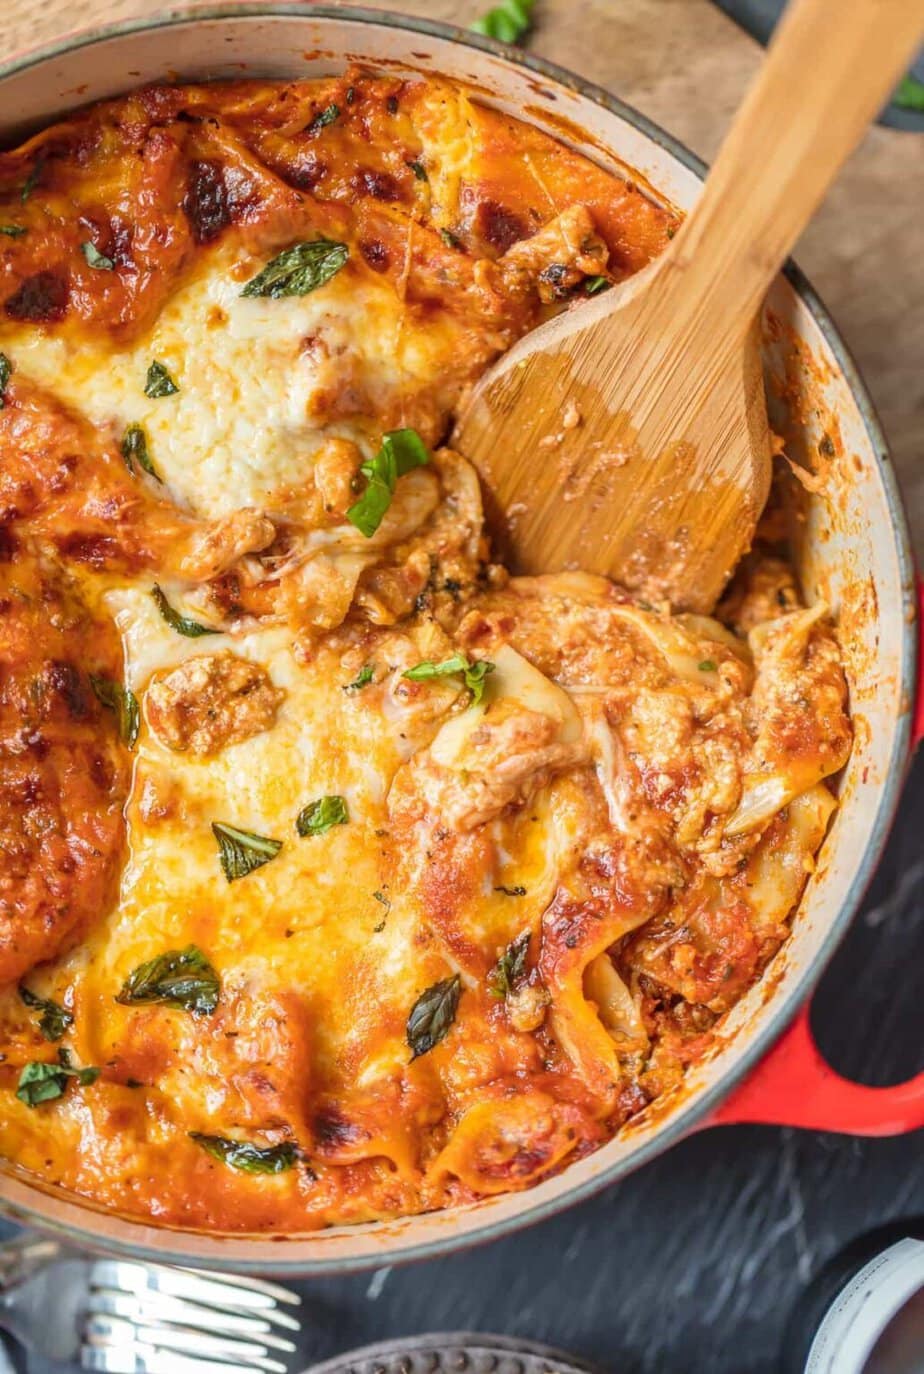 25 Of The Best One Pot Dutch Oven Dinner Ideas - Back To My Southern Roots